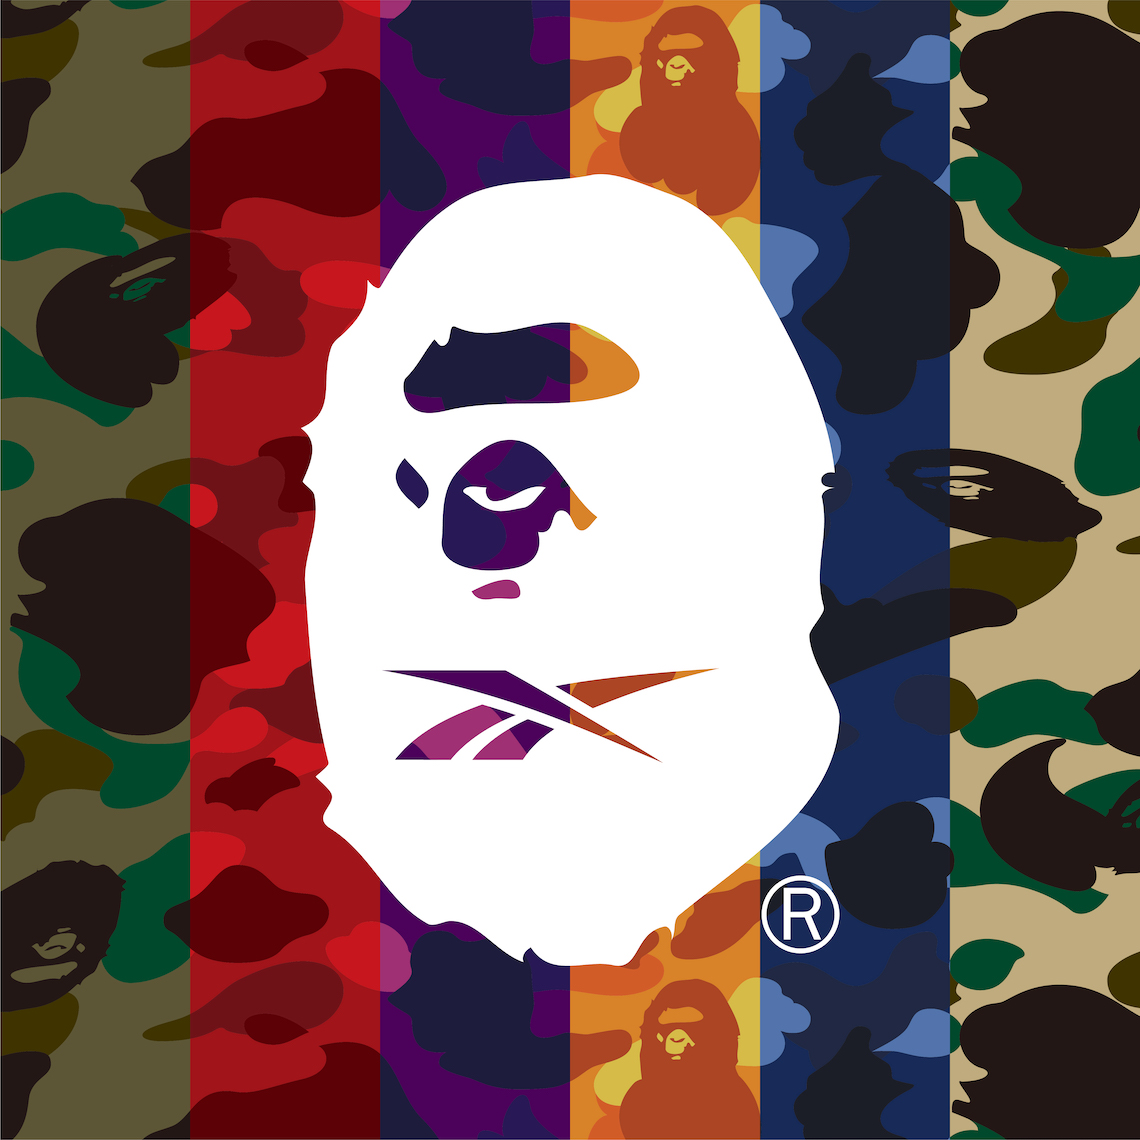 BAPE And Reebok Start 2022 By Teasing Spring/Summer Collection